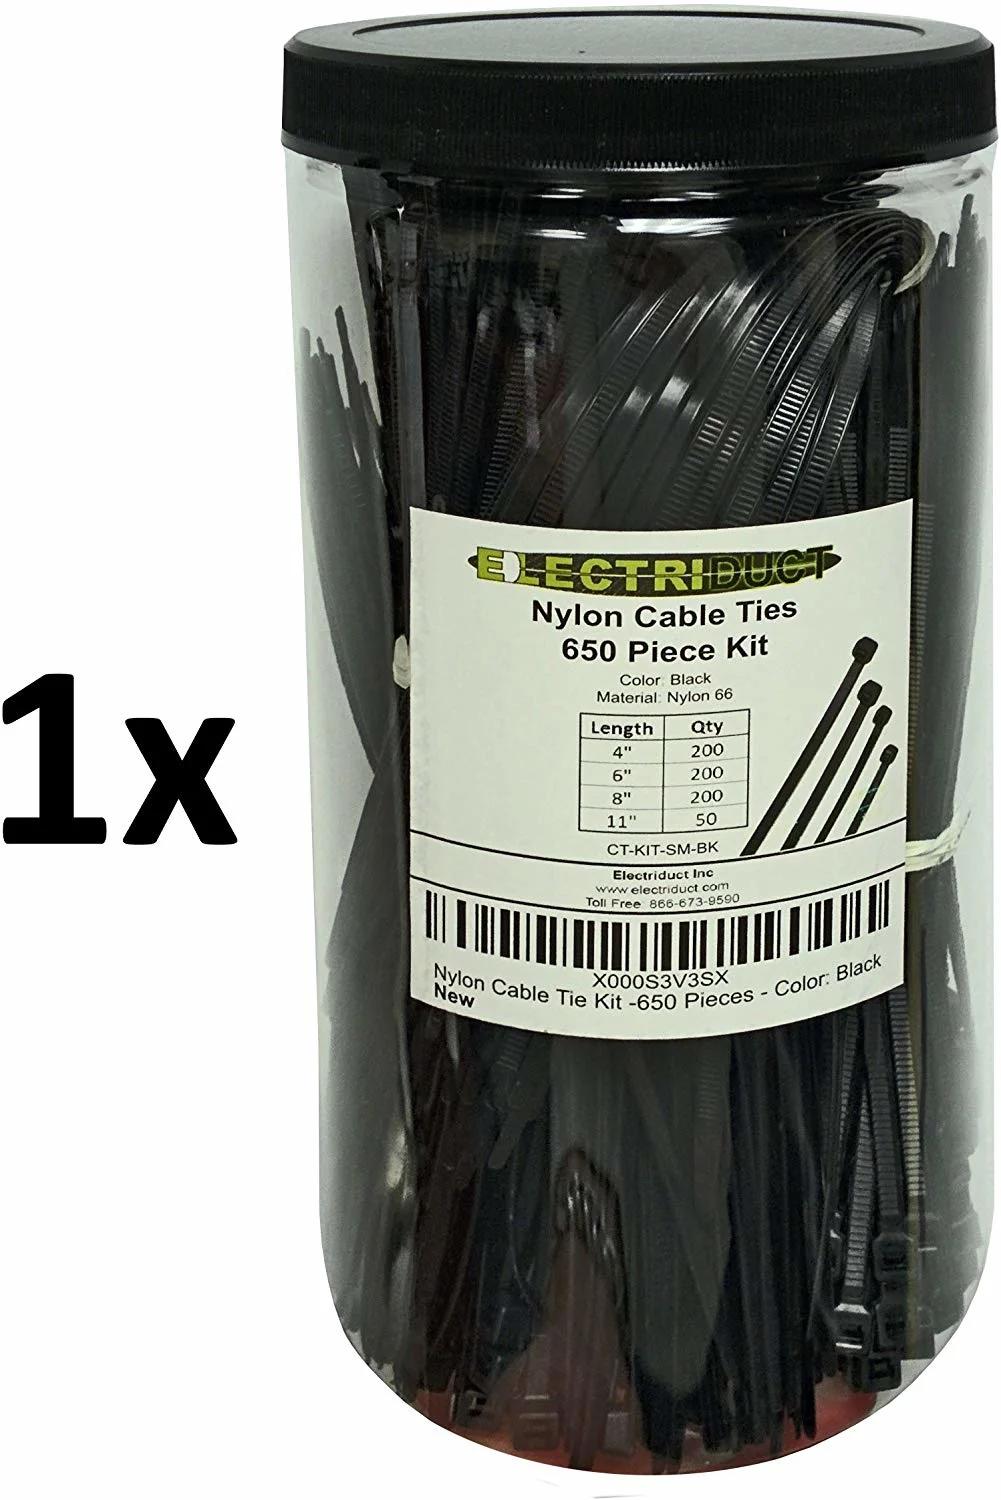 Electriduct Nylon Cable Tie Kit - 650 Zip Ties - Assorted Lengths 4", 6", 8", 11" - Black